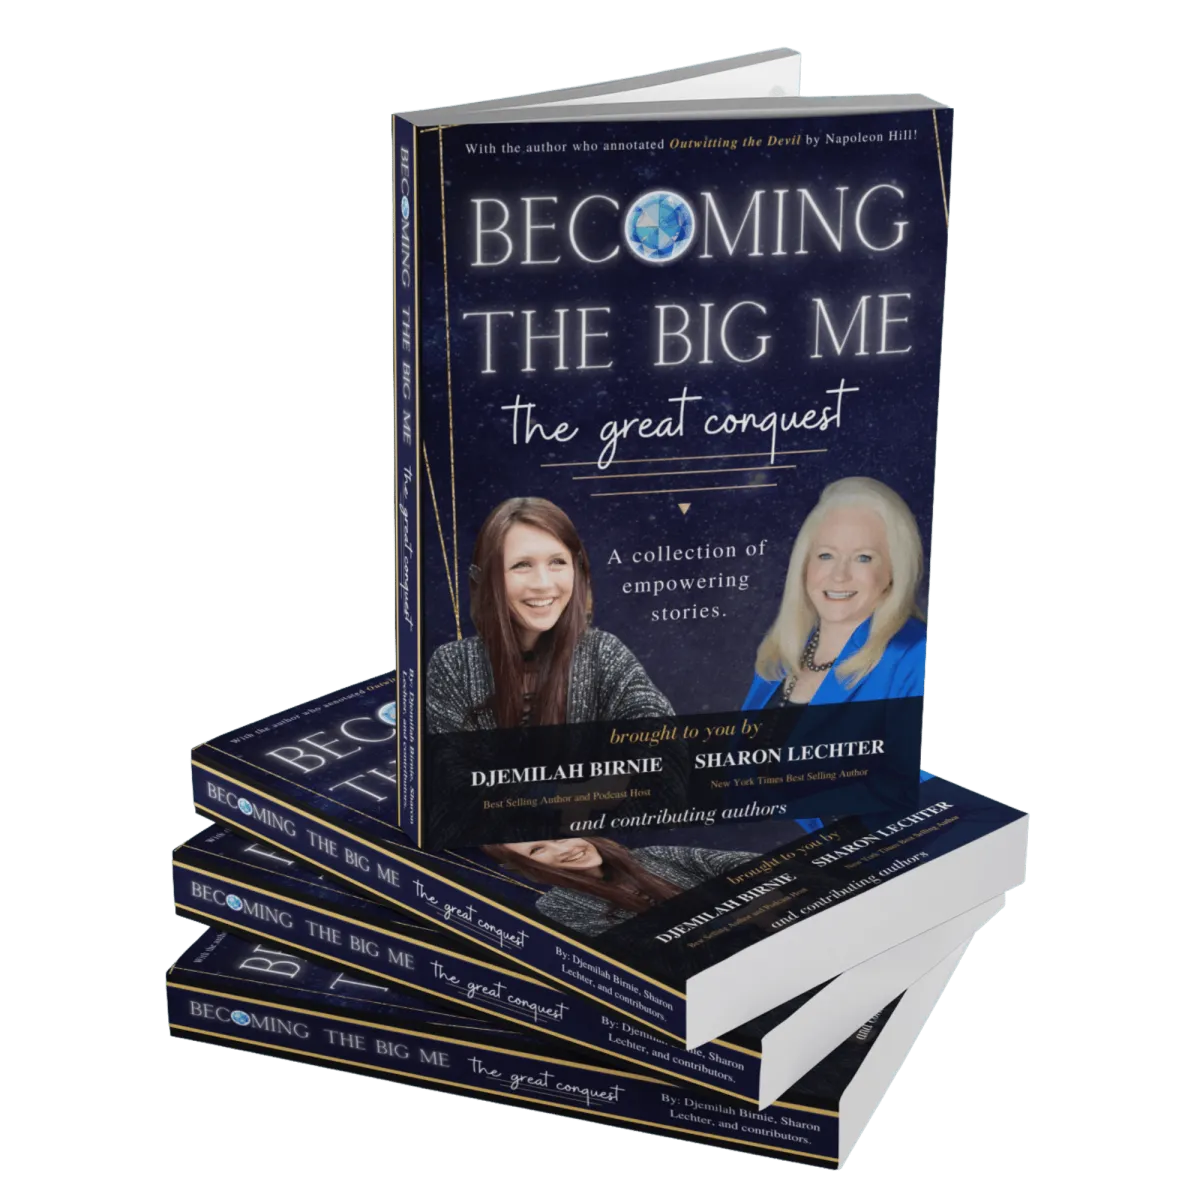 Becoming the Big Me: The Great Conquest by Djemilah Birnie, Sharon Lechter, Nick Wingo, Dr. Frances Malone, Jenny Emerson, Russel Creed, Jennifer Aube, Kyle Chisamore, Valerie Fischer, Cory & JoJo Rankin, Peter Neilson, Kiki Rae, Tanya Milano-Snell, Dannah Macalinga, and Kira Birnie.